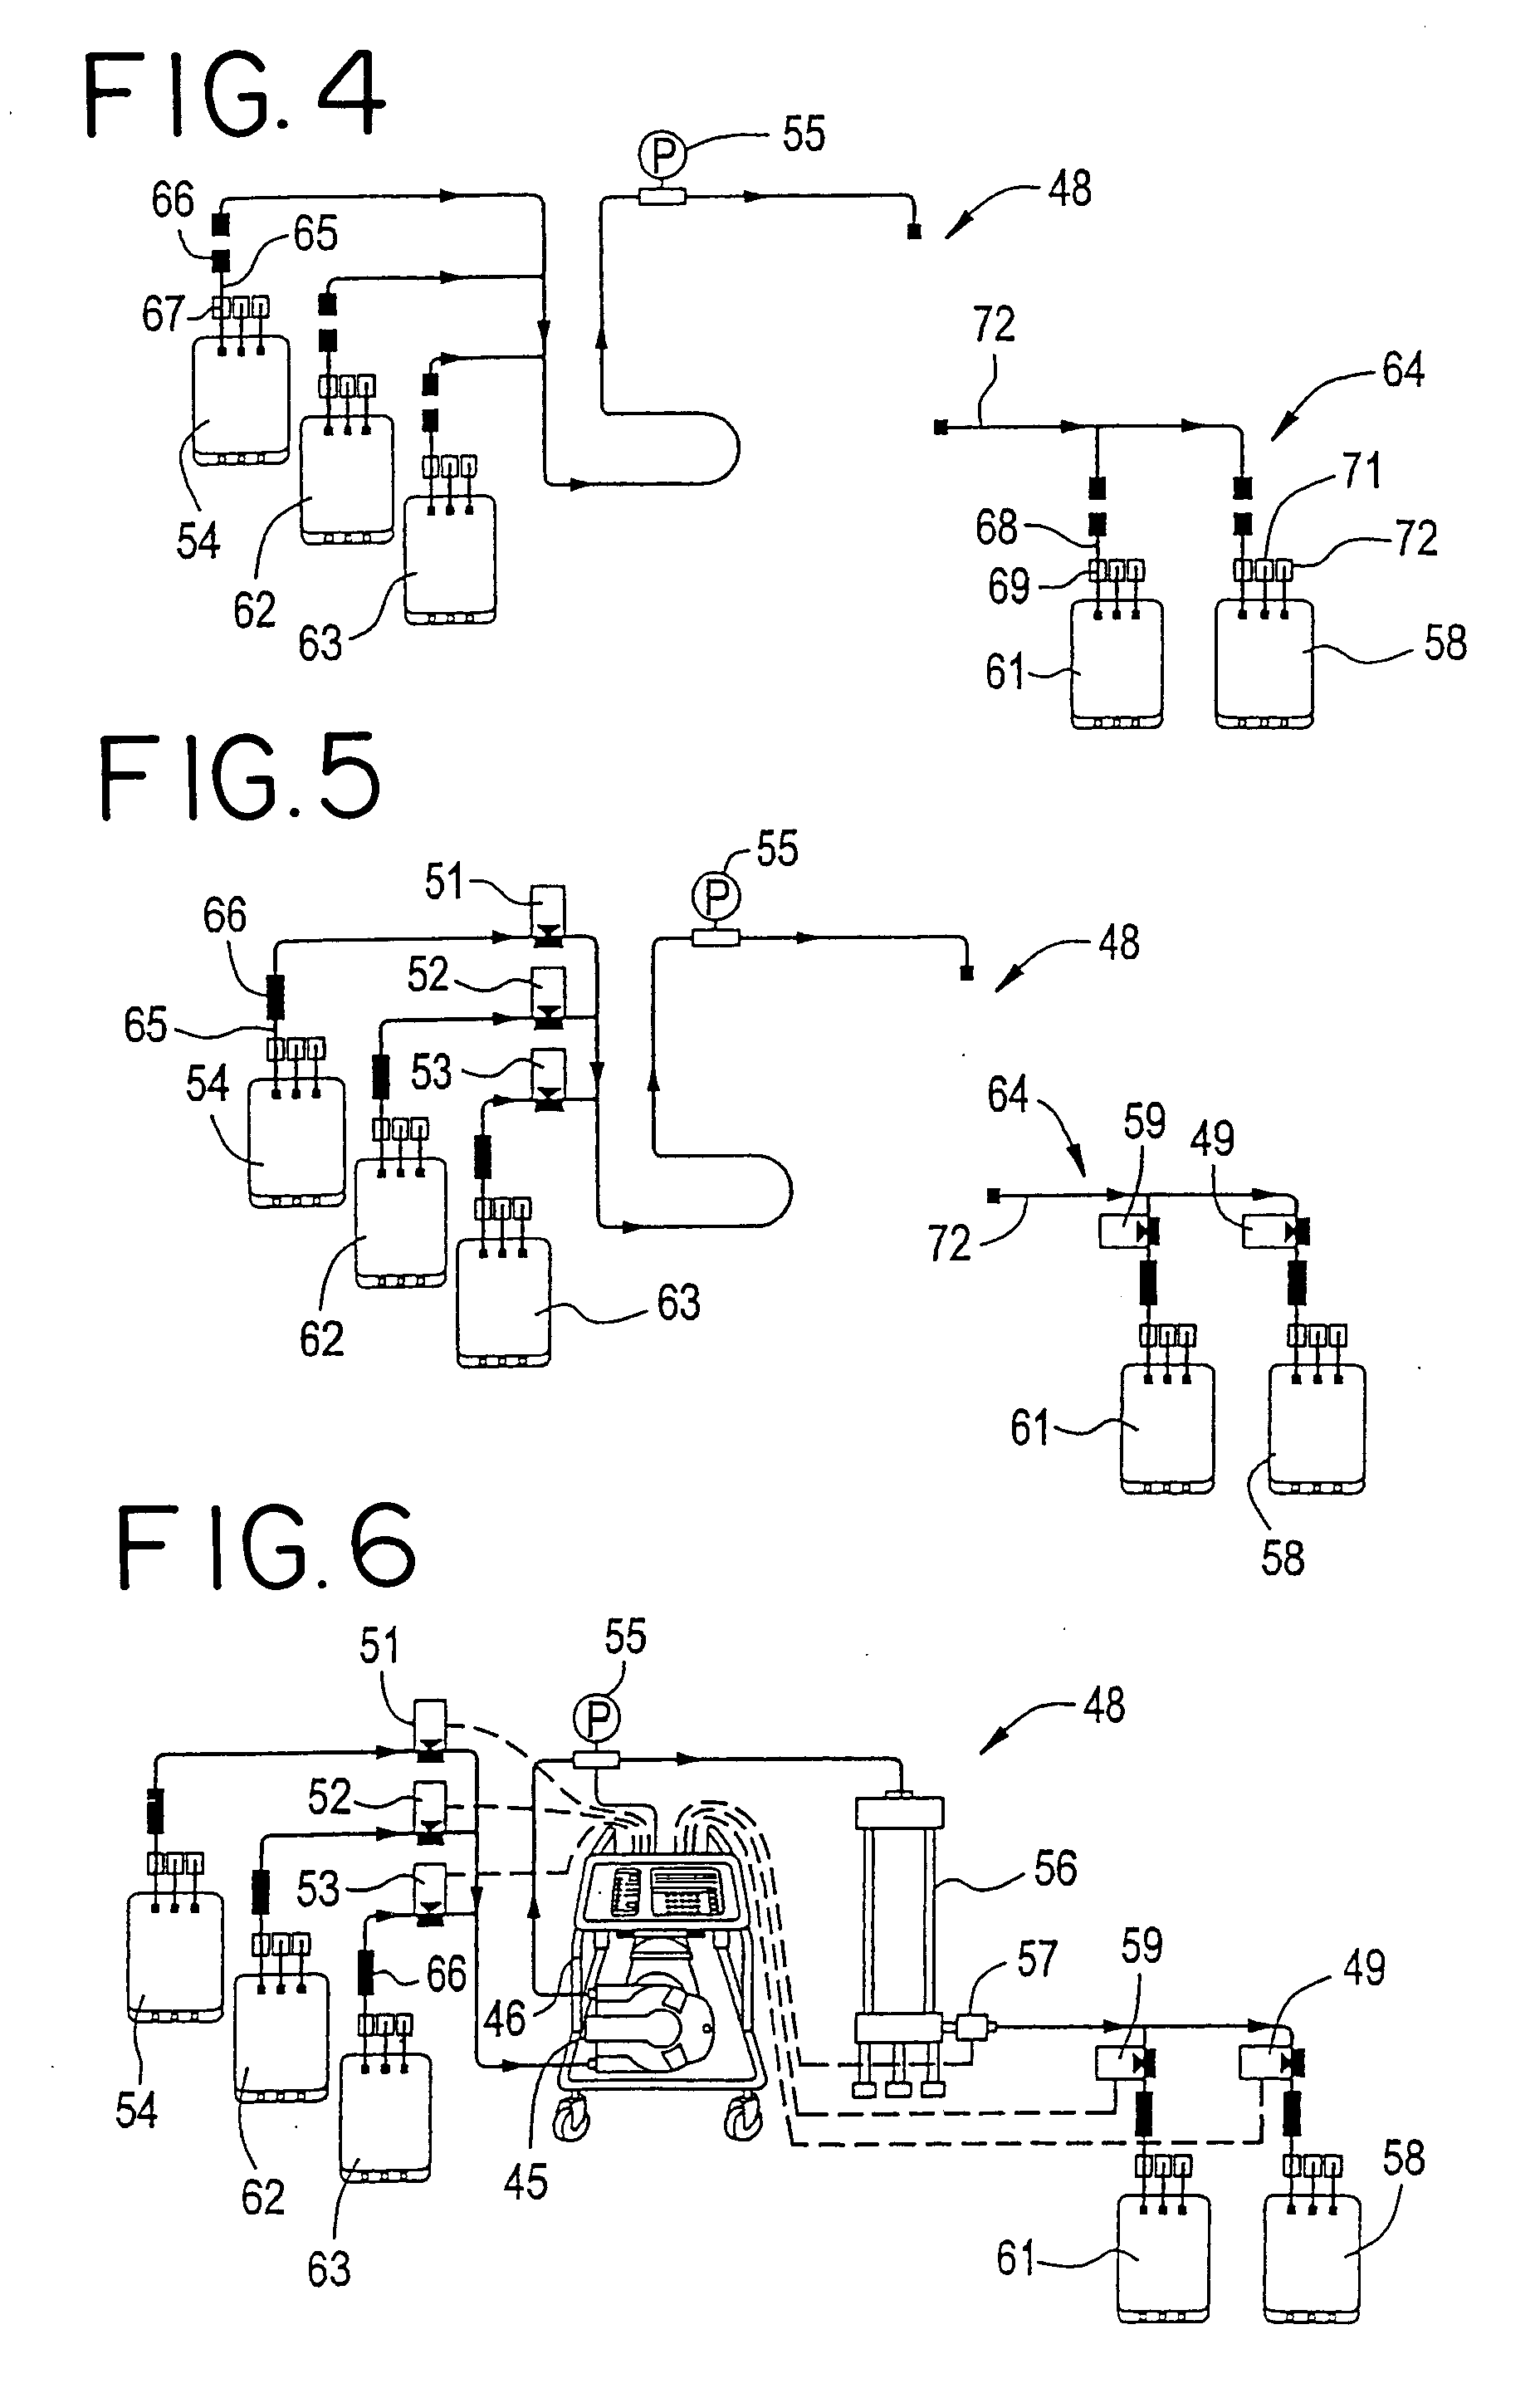 Single-use manifold and sensors for automated, aseptic transfer of solutions in bioprocessing applications